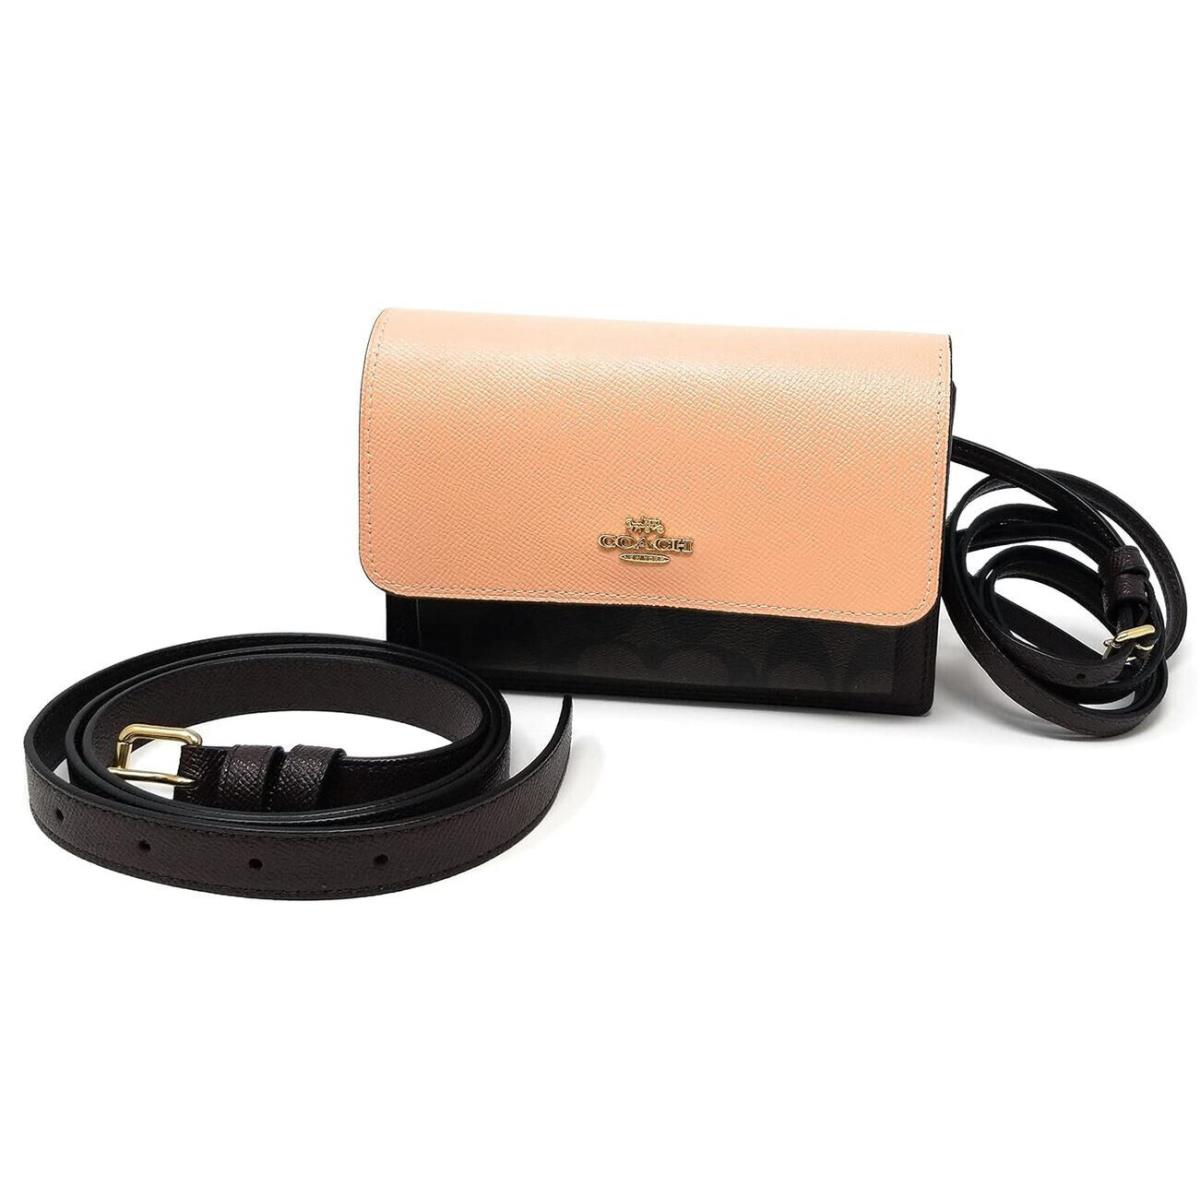 Coach Snake Embossed Leather Foldover Beltbag Crossbody Brown Shell Pink - Handle/Strap: Brown, Hardware: Gold, Lining: Pink